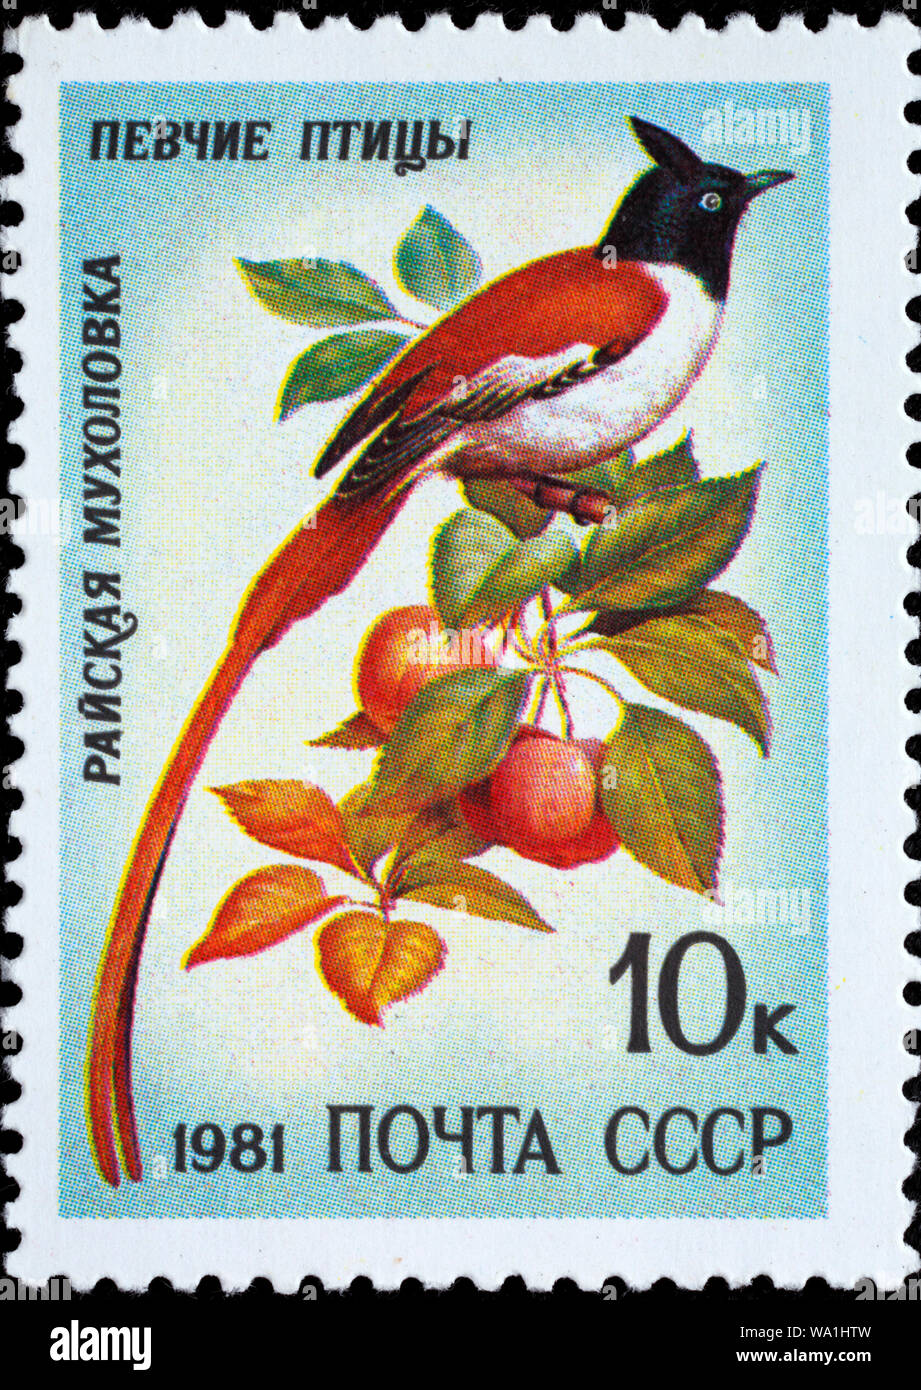 Indian Paradise Flycatcher, Terpsiphone paradisi, Song bird, postage stamp, Russia, USSR, 1981 Stock Photo